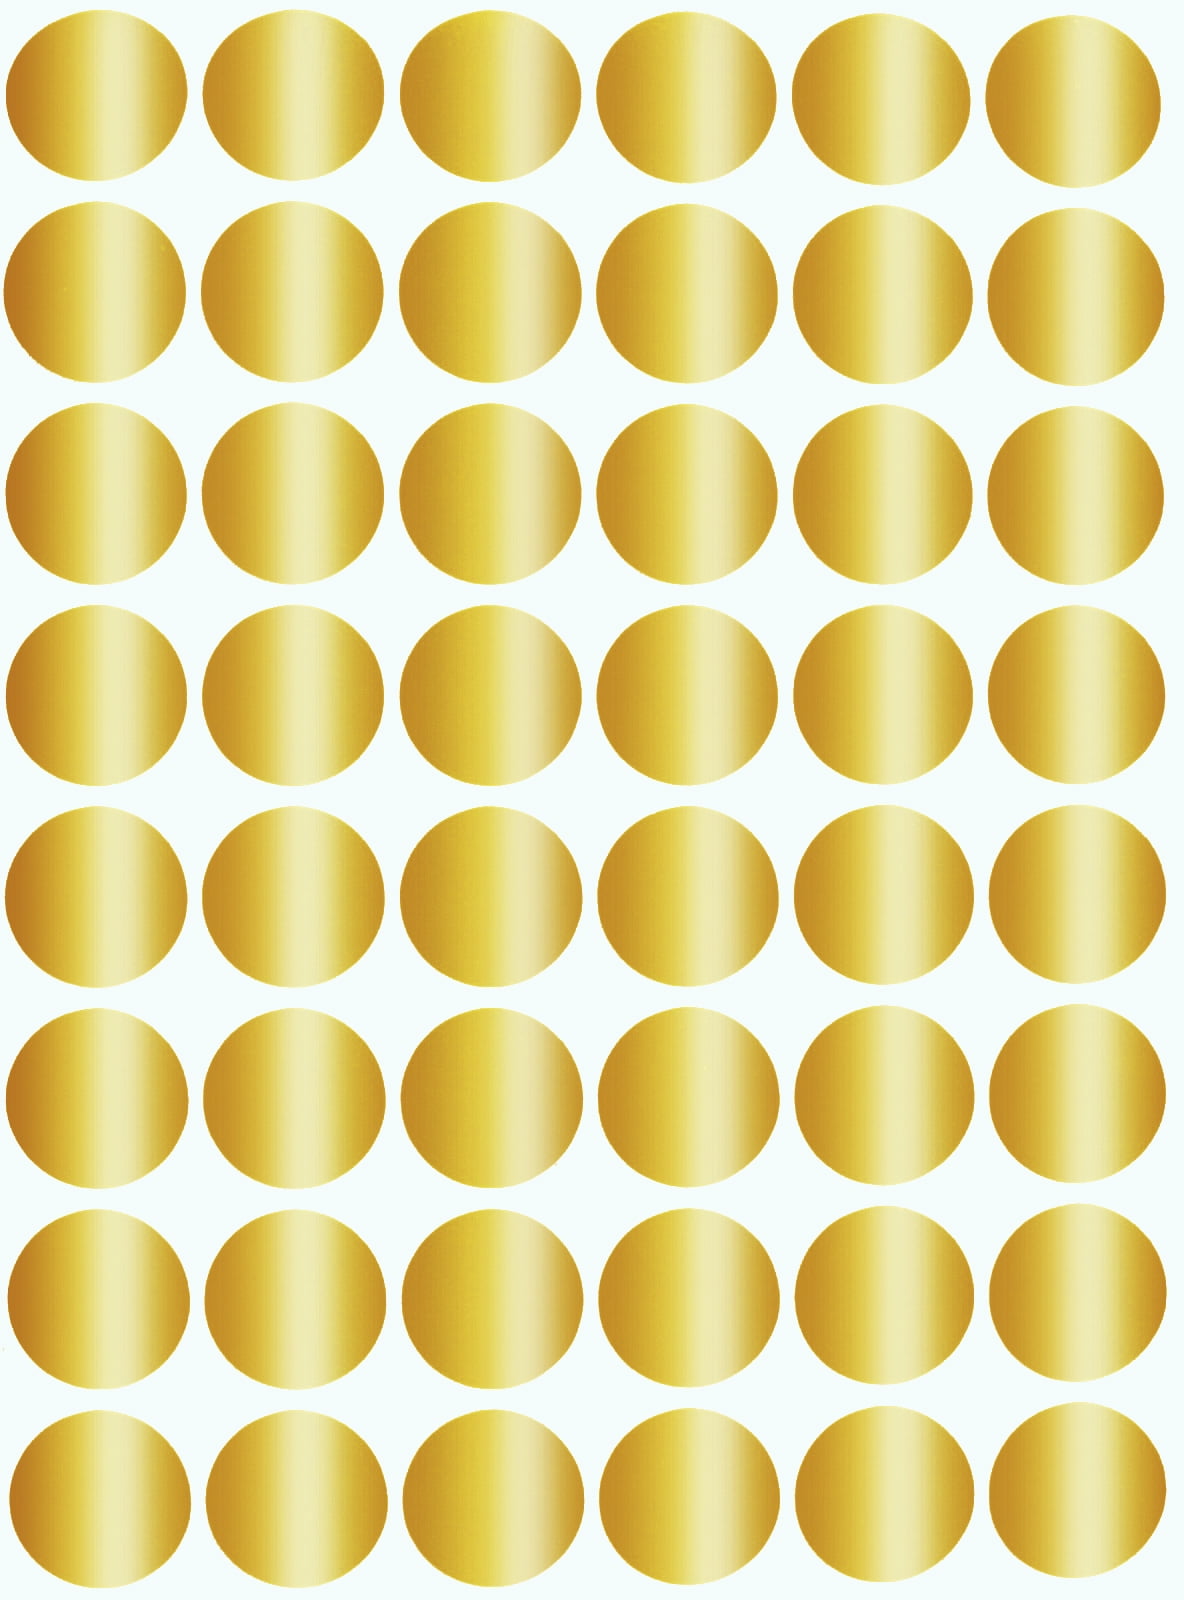 245 x 13mm Gold DOT STICKERS Round Sticky Adhesive Spot Circles Paper Labels 